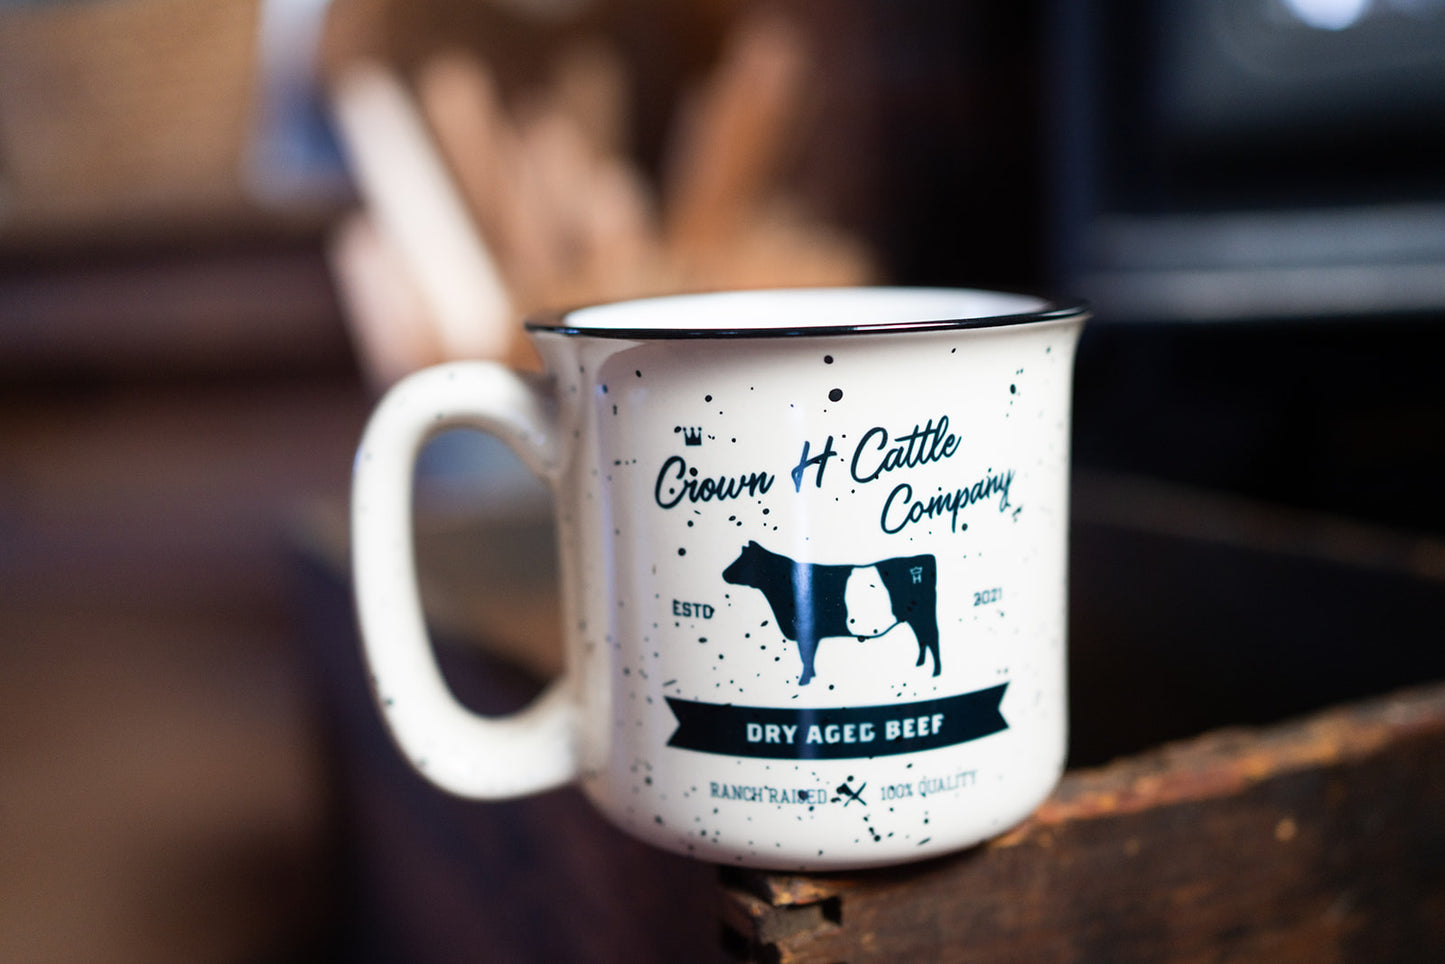 "Sammie the Beltie" Crown H Cattle Company Campfire Speckled Mug